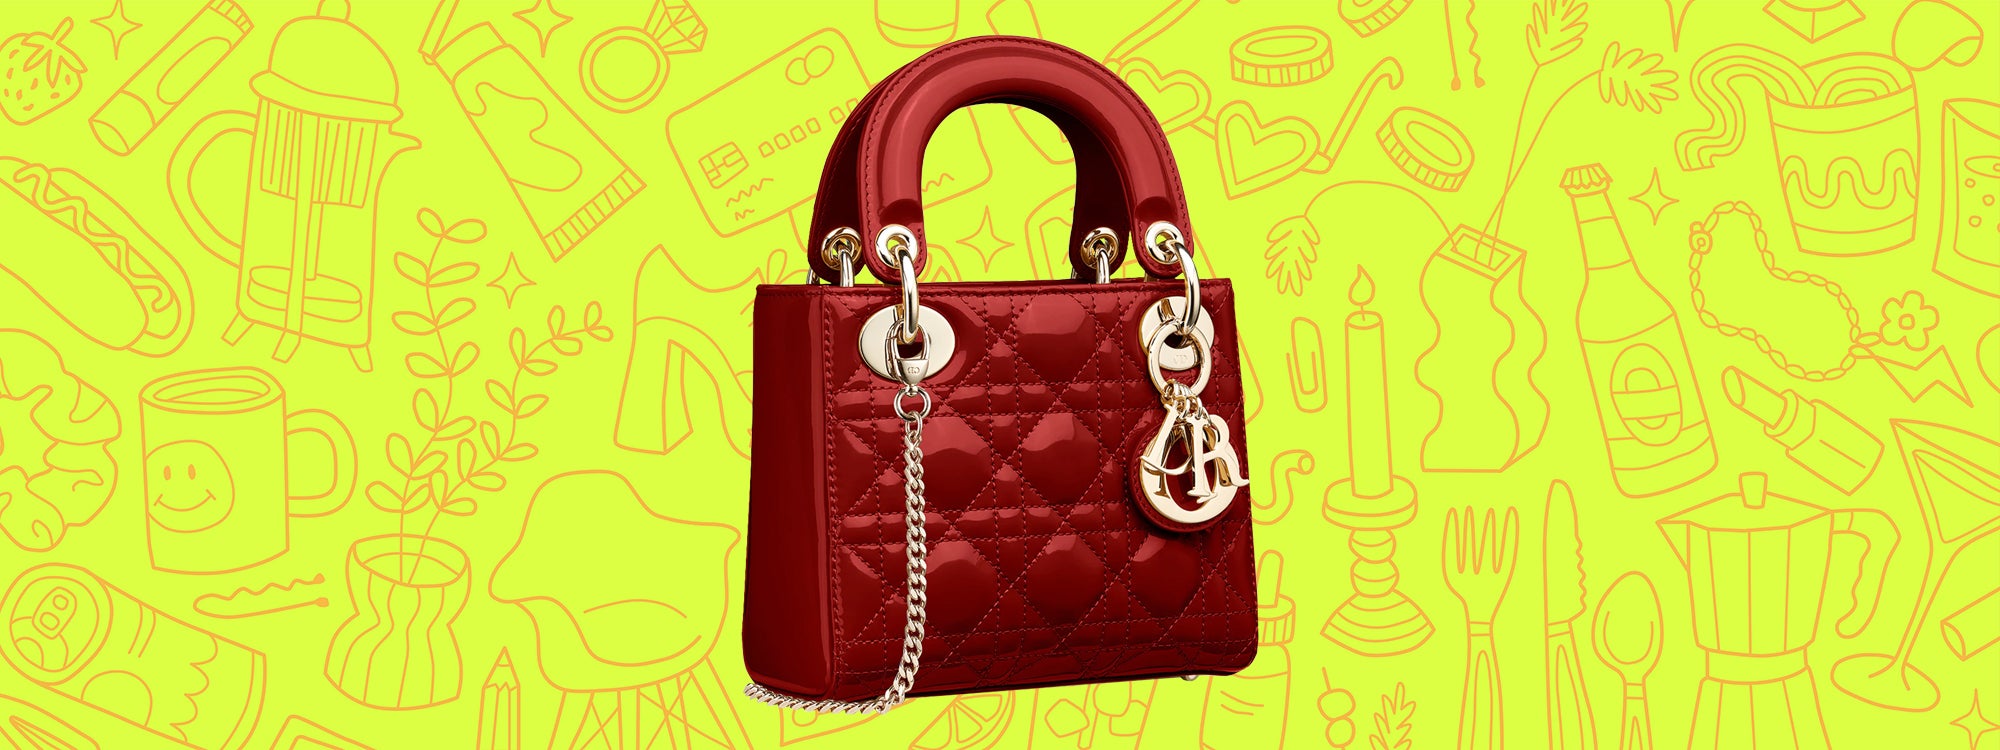 Rent Louis Vuitton Jewelry & Handbags at only $55/month